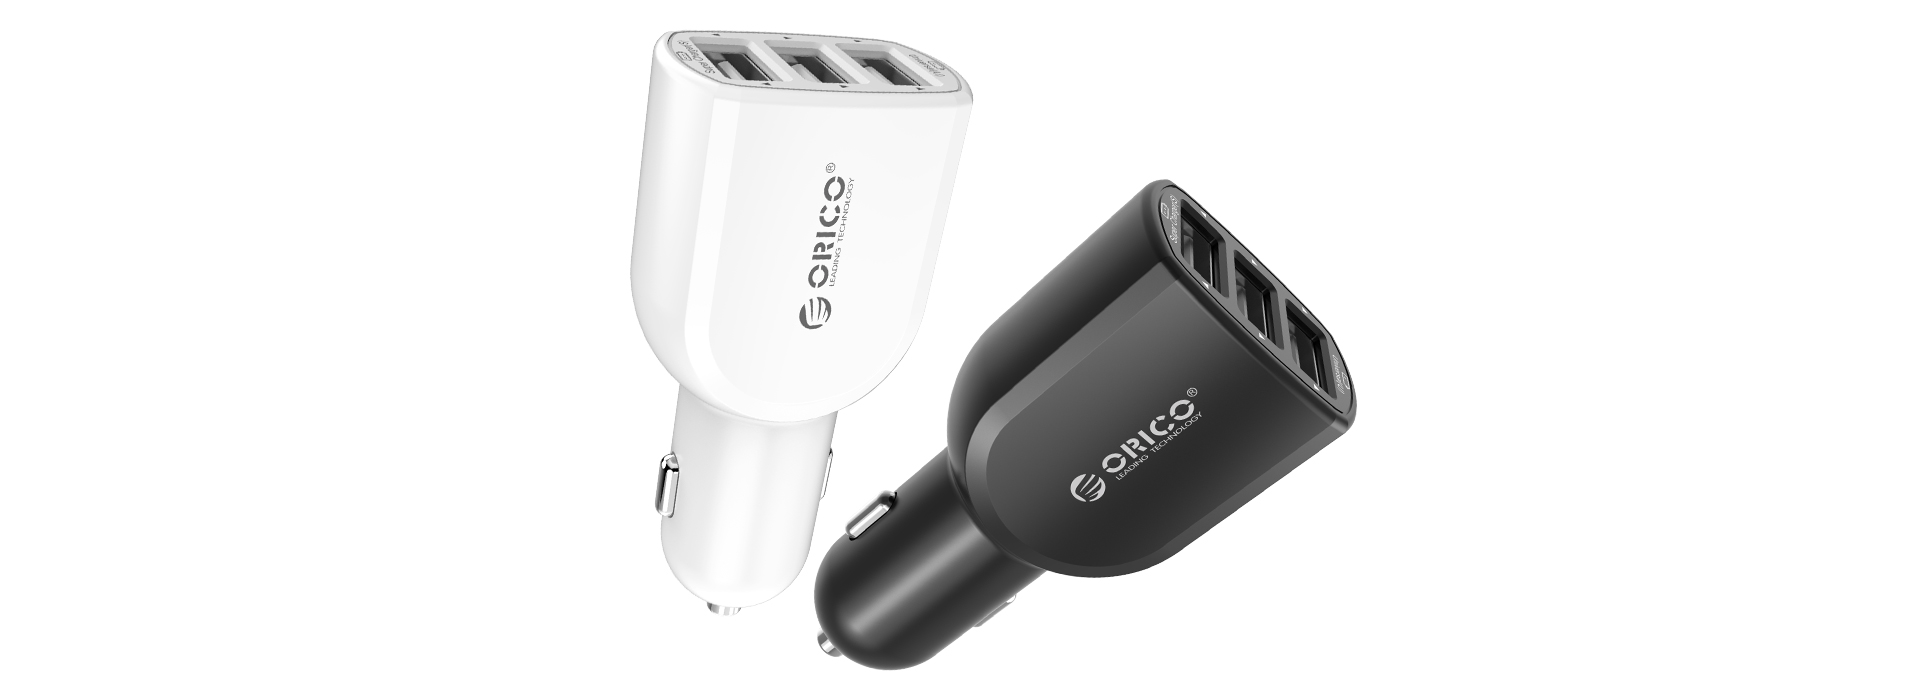 ORICO 3 Port USB Car Charger with Smart Super Charger